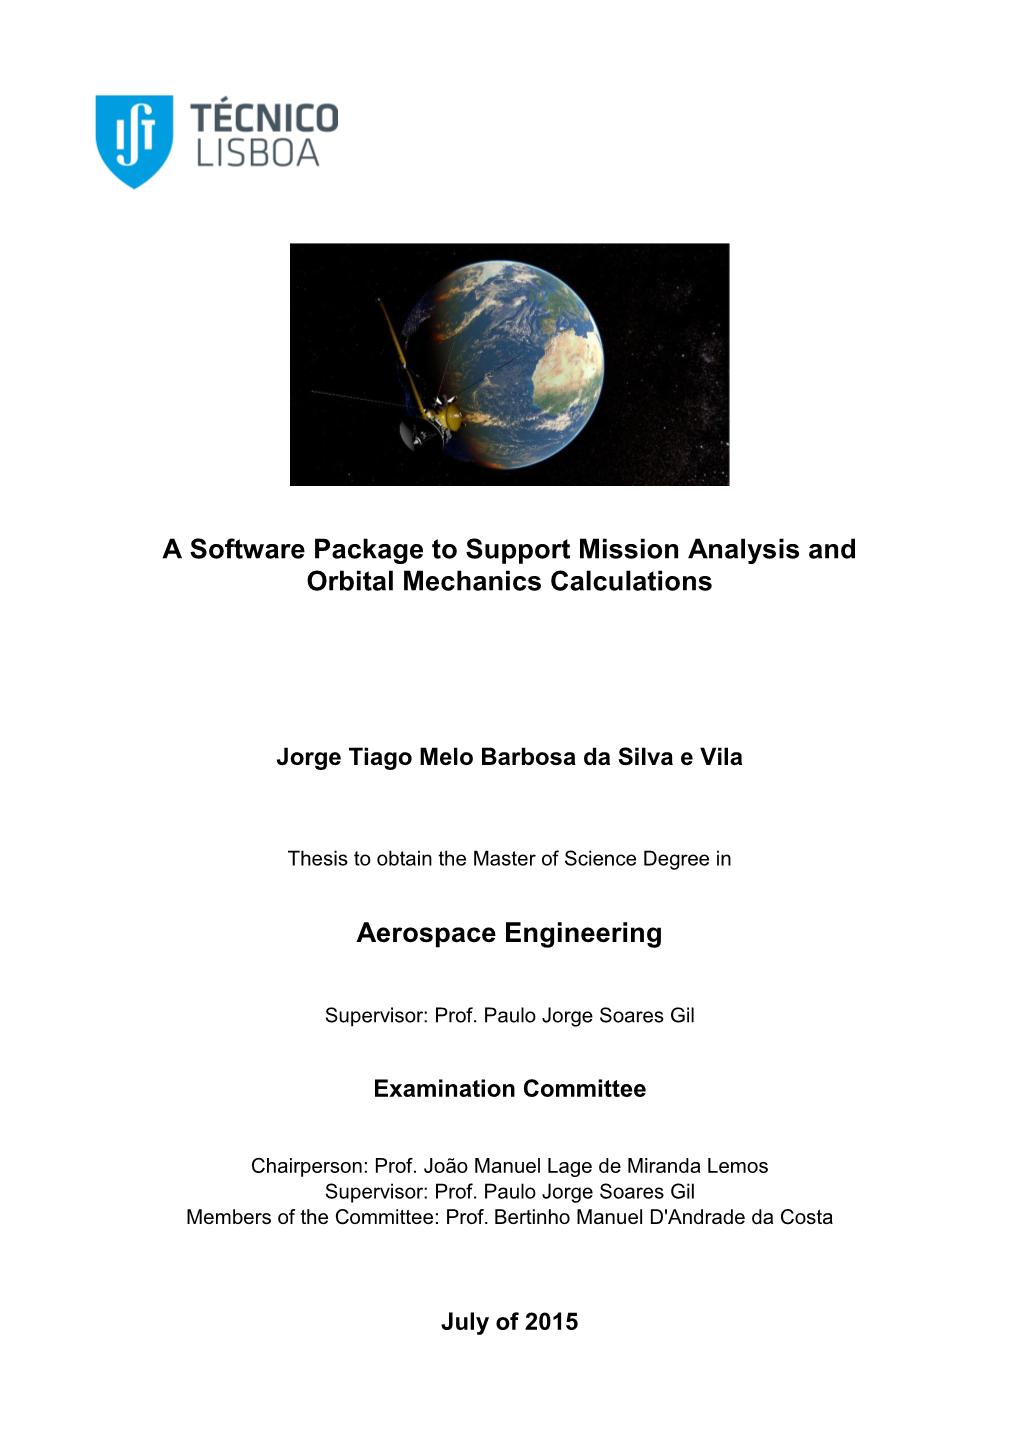 A Software Package to Support Mission Analysis and Orbital Mechanics Calculations